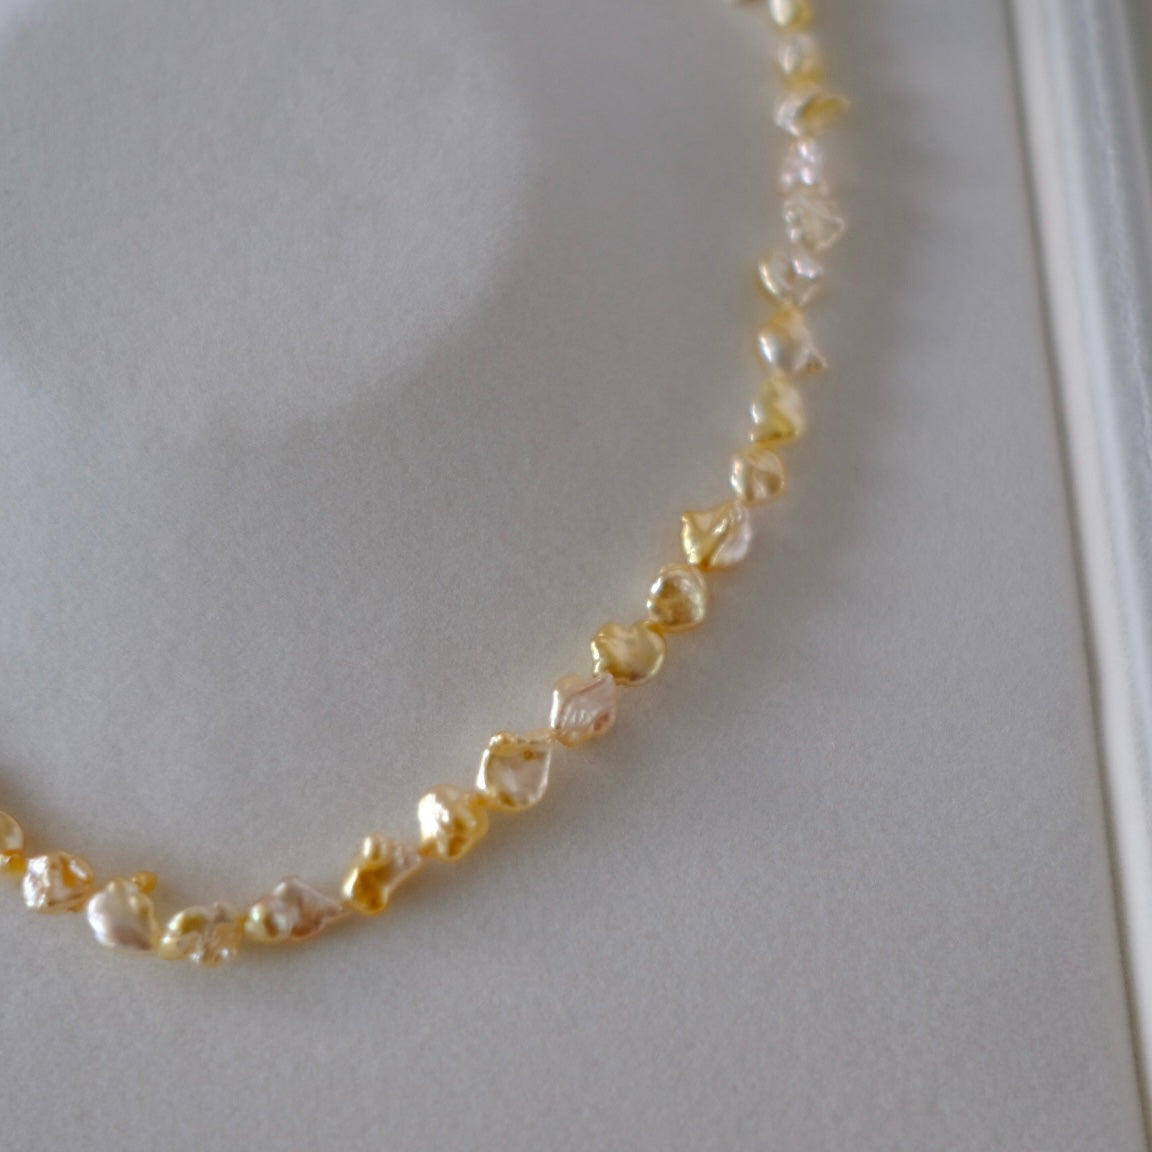 Golden South Sea Pearl Necklace, Keshi, 4-7mm